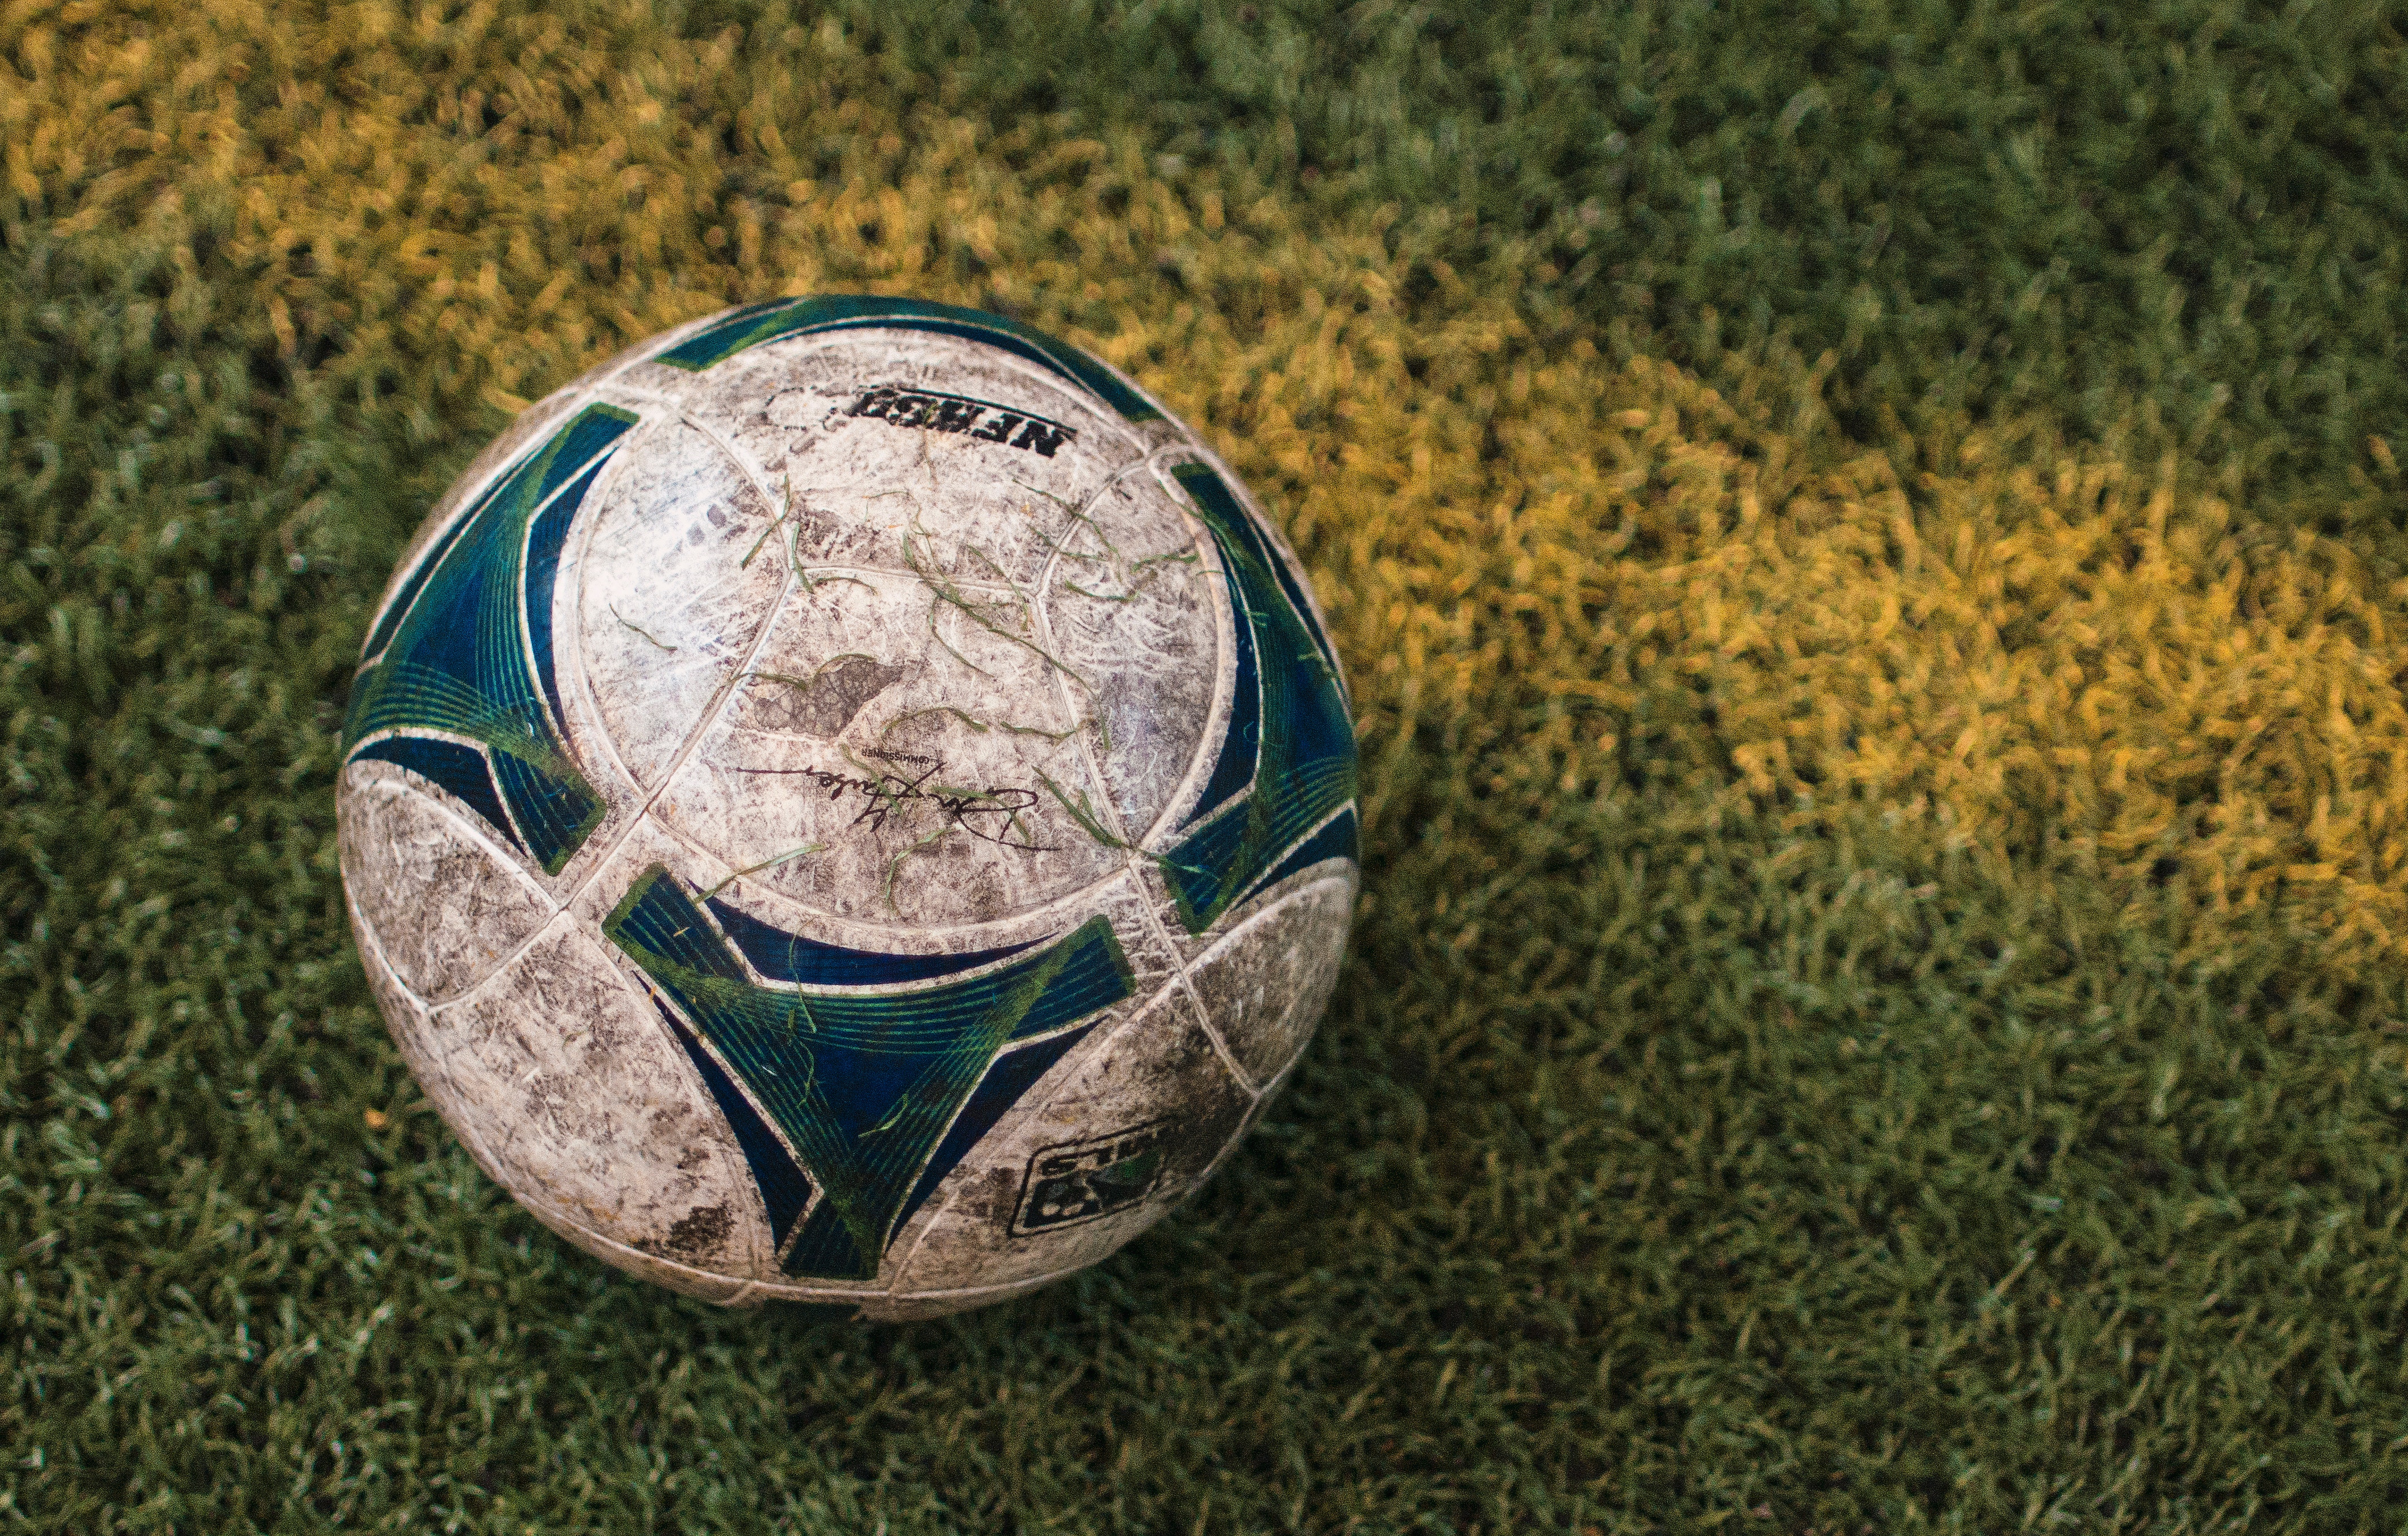 Our Tattered Footballs Taught Us the Importance of Fighting For What We Love